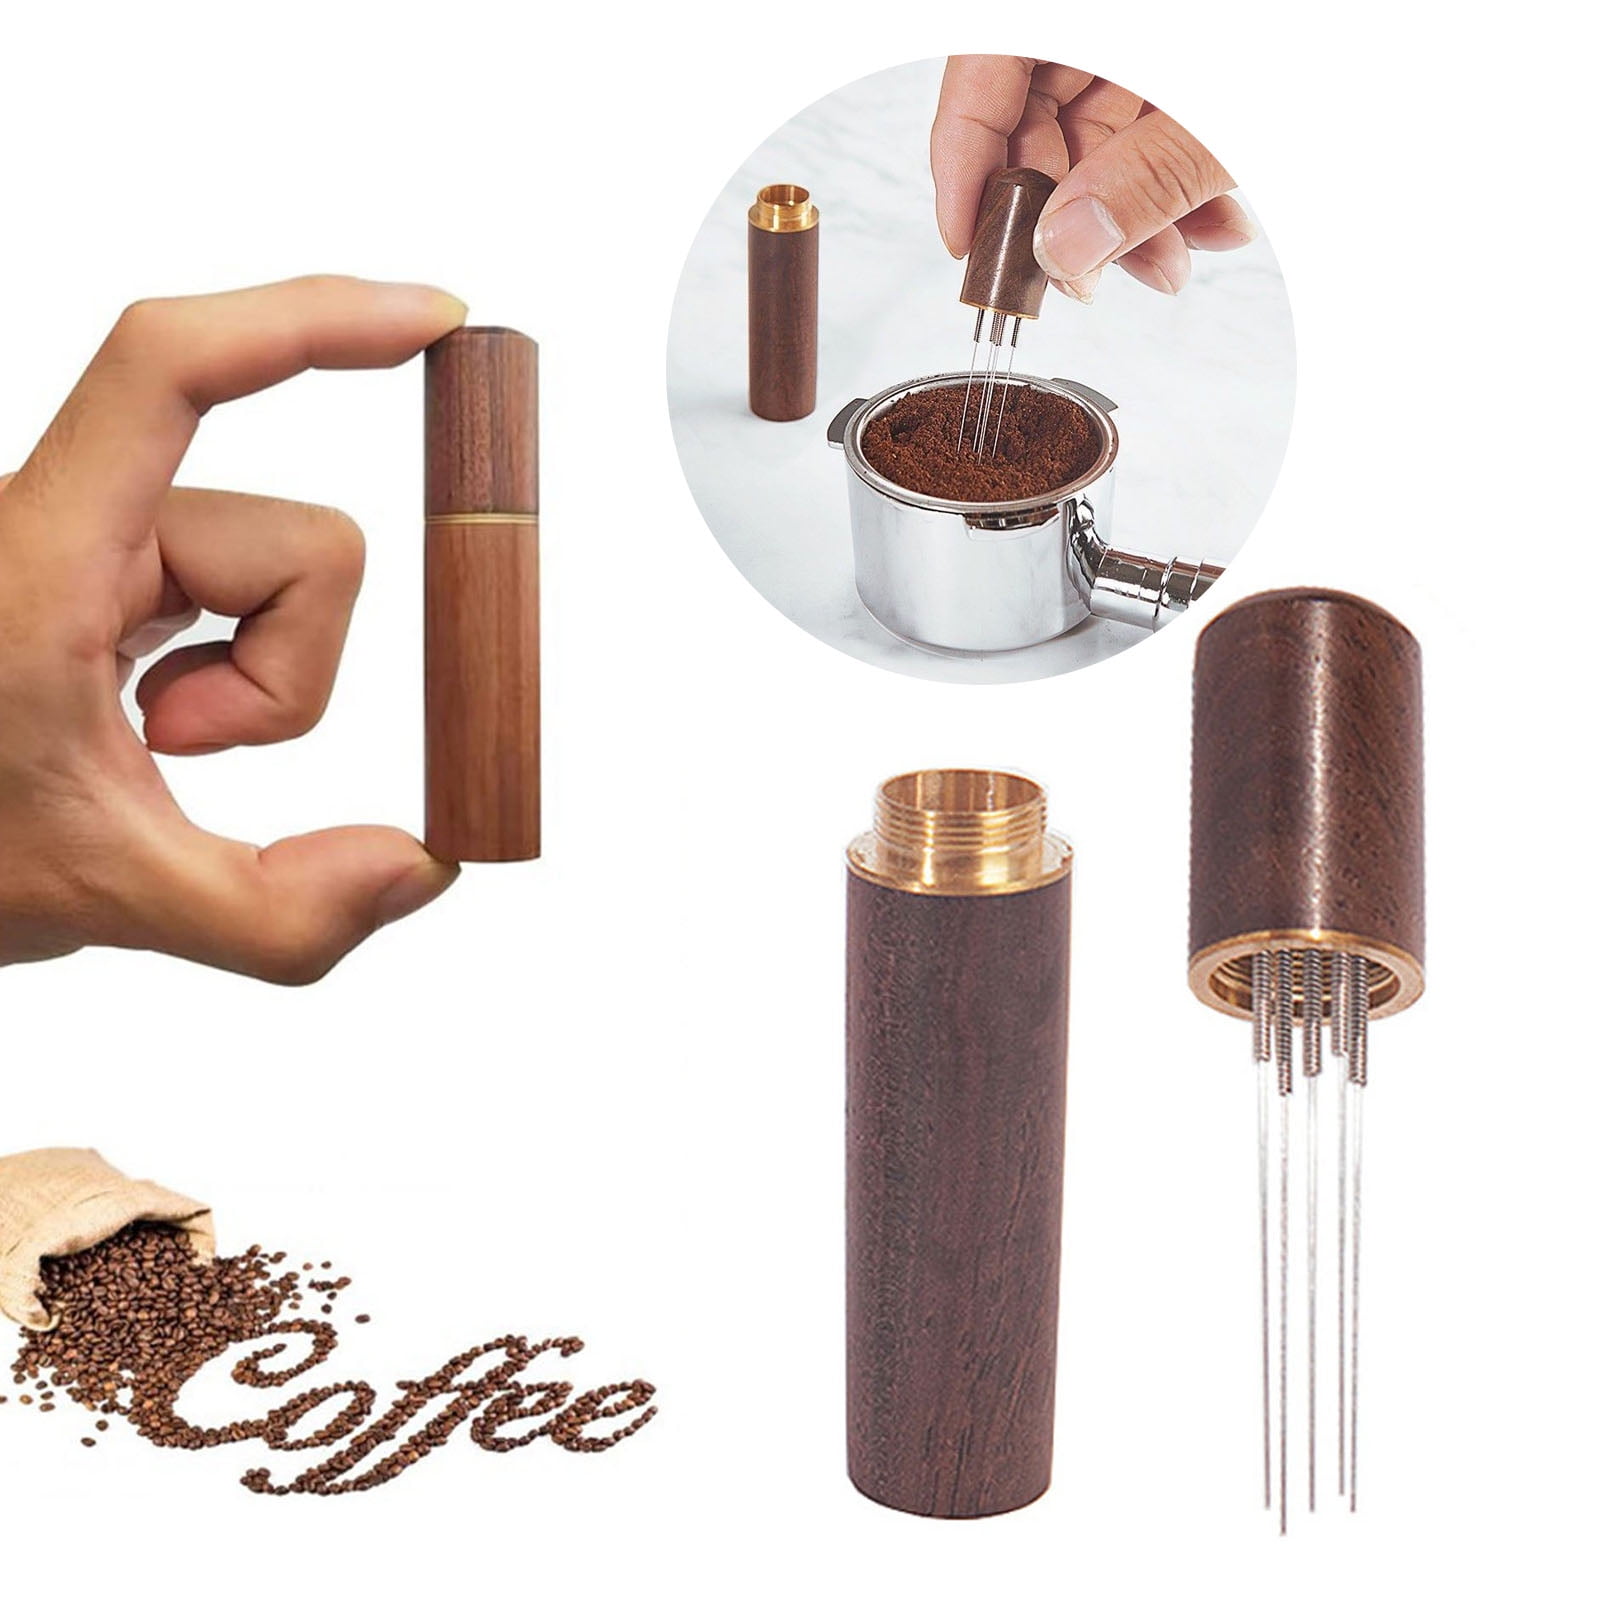 Stainless Steel Coffee Stirrers - FLYF250 - IdeaStage Promotional